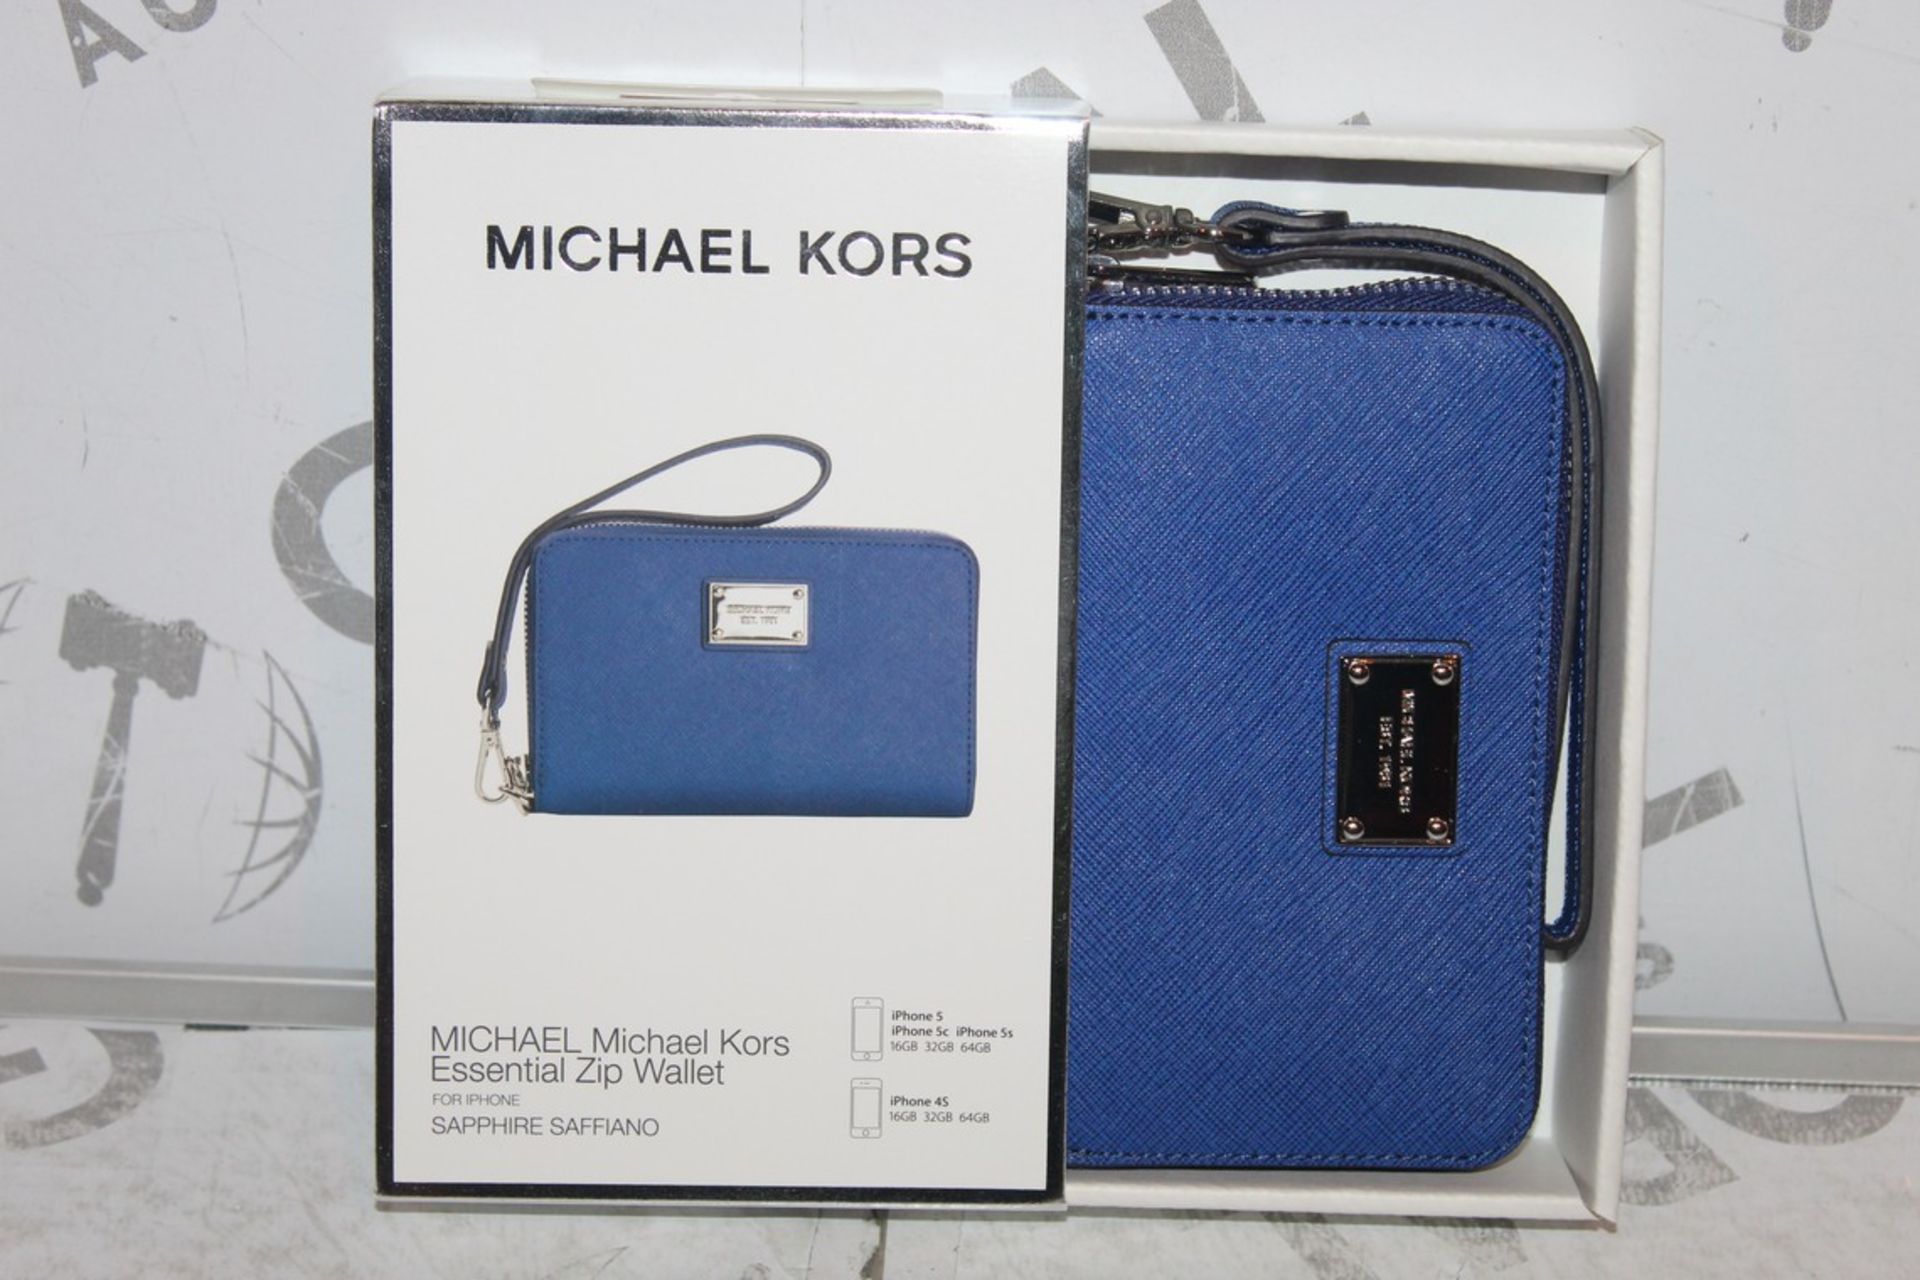 Lot to Contain 2 Boxed Michael Kors Sapphire Sapphino Blue Essential Zip Wallets Combined RRP £70